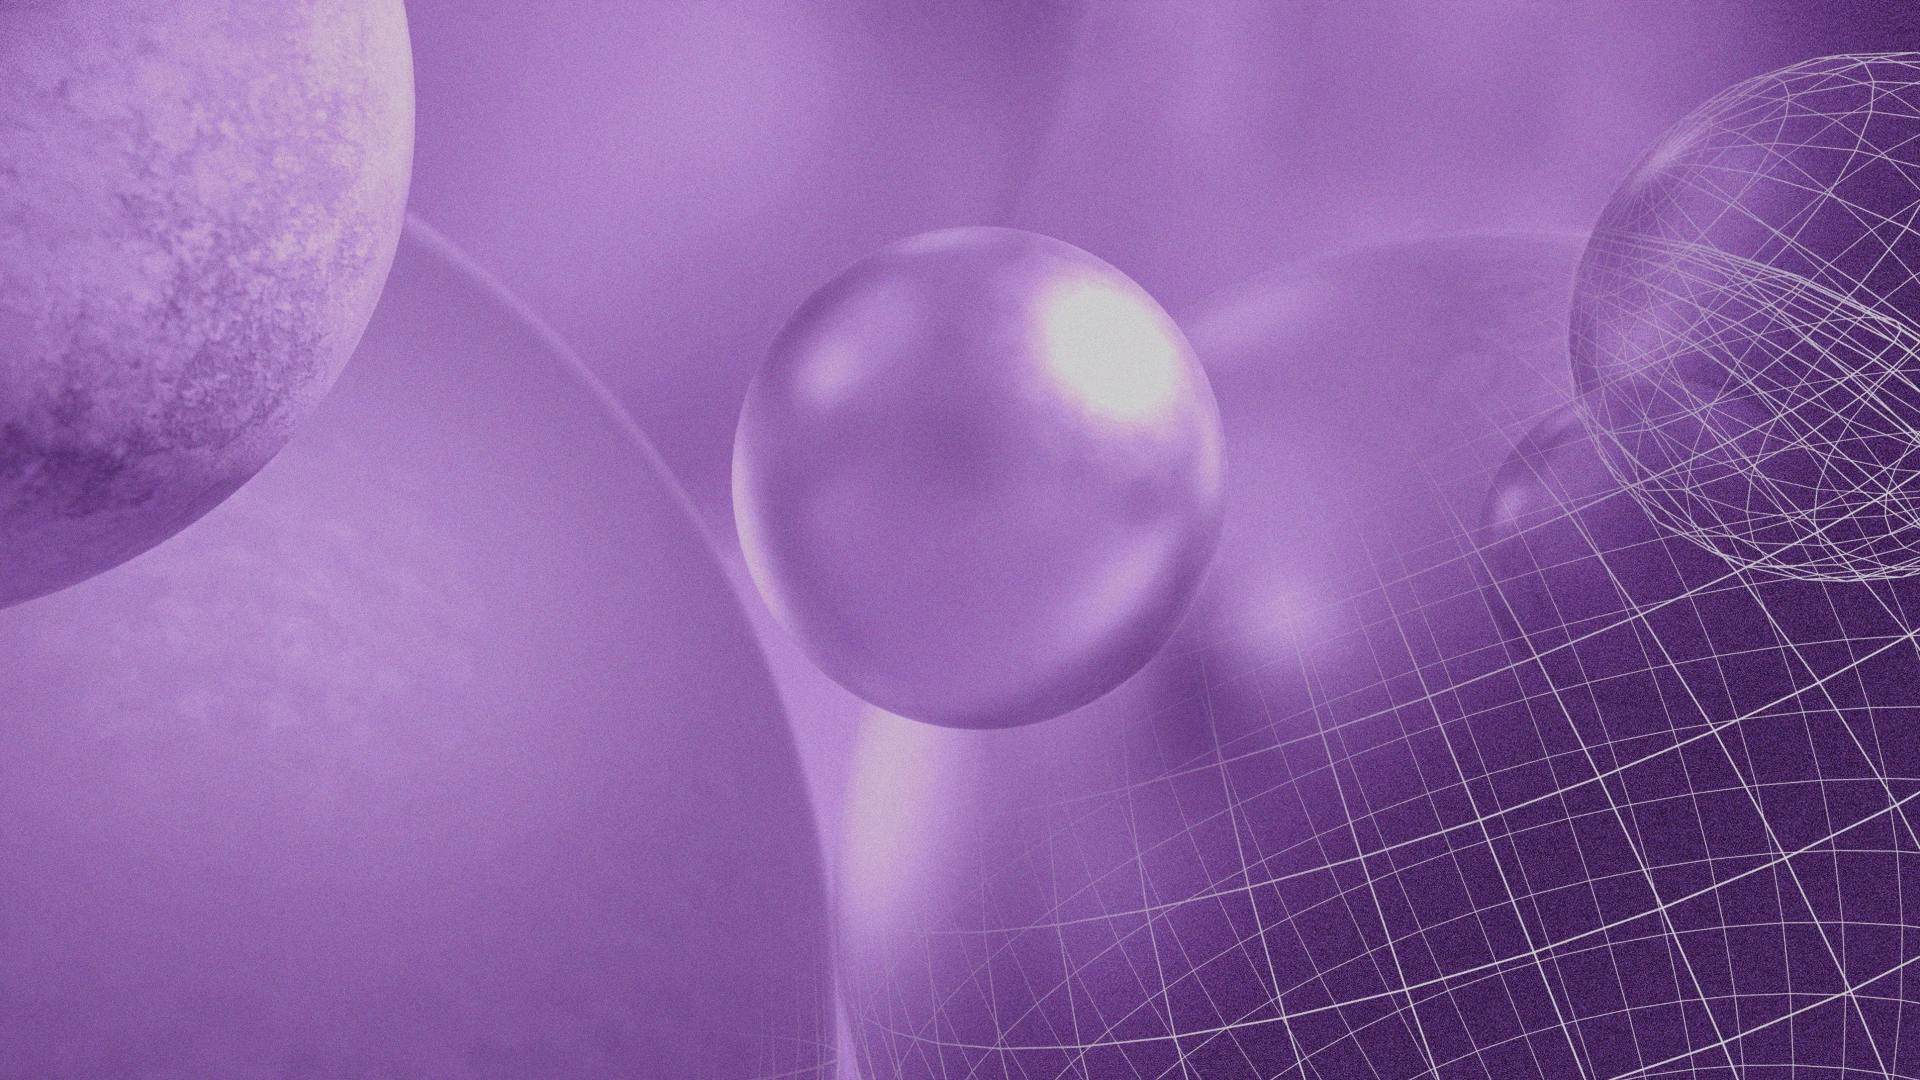 Picture of purple spheres